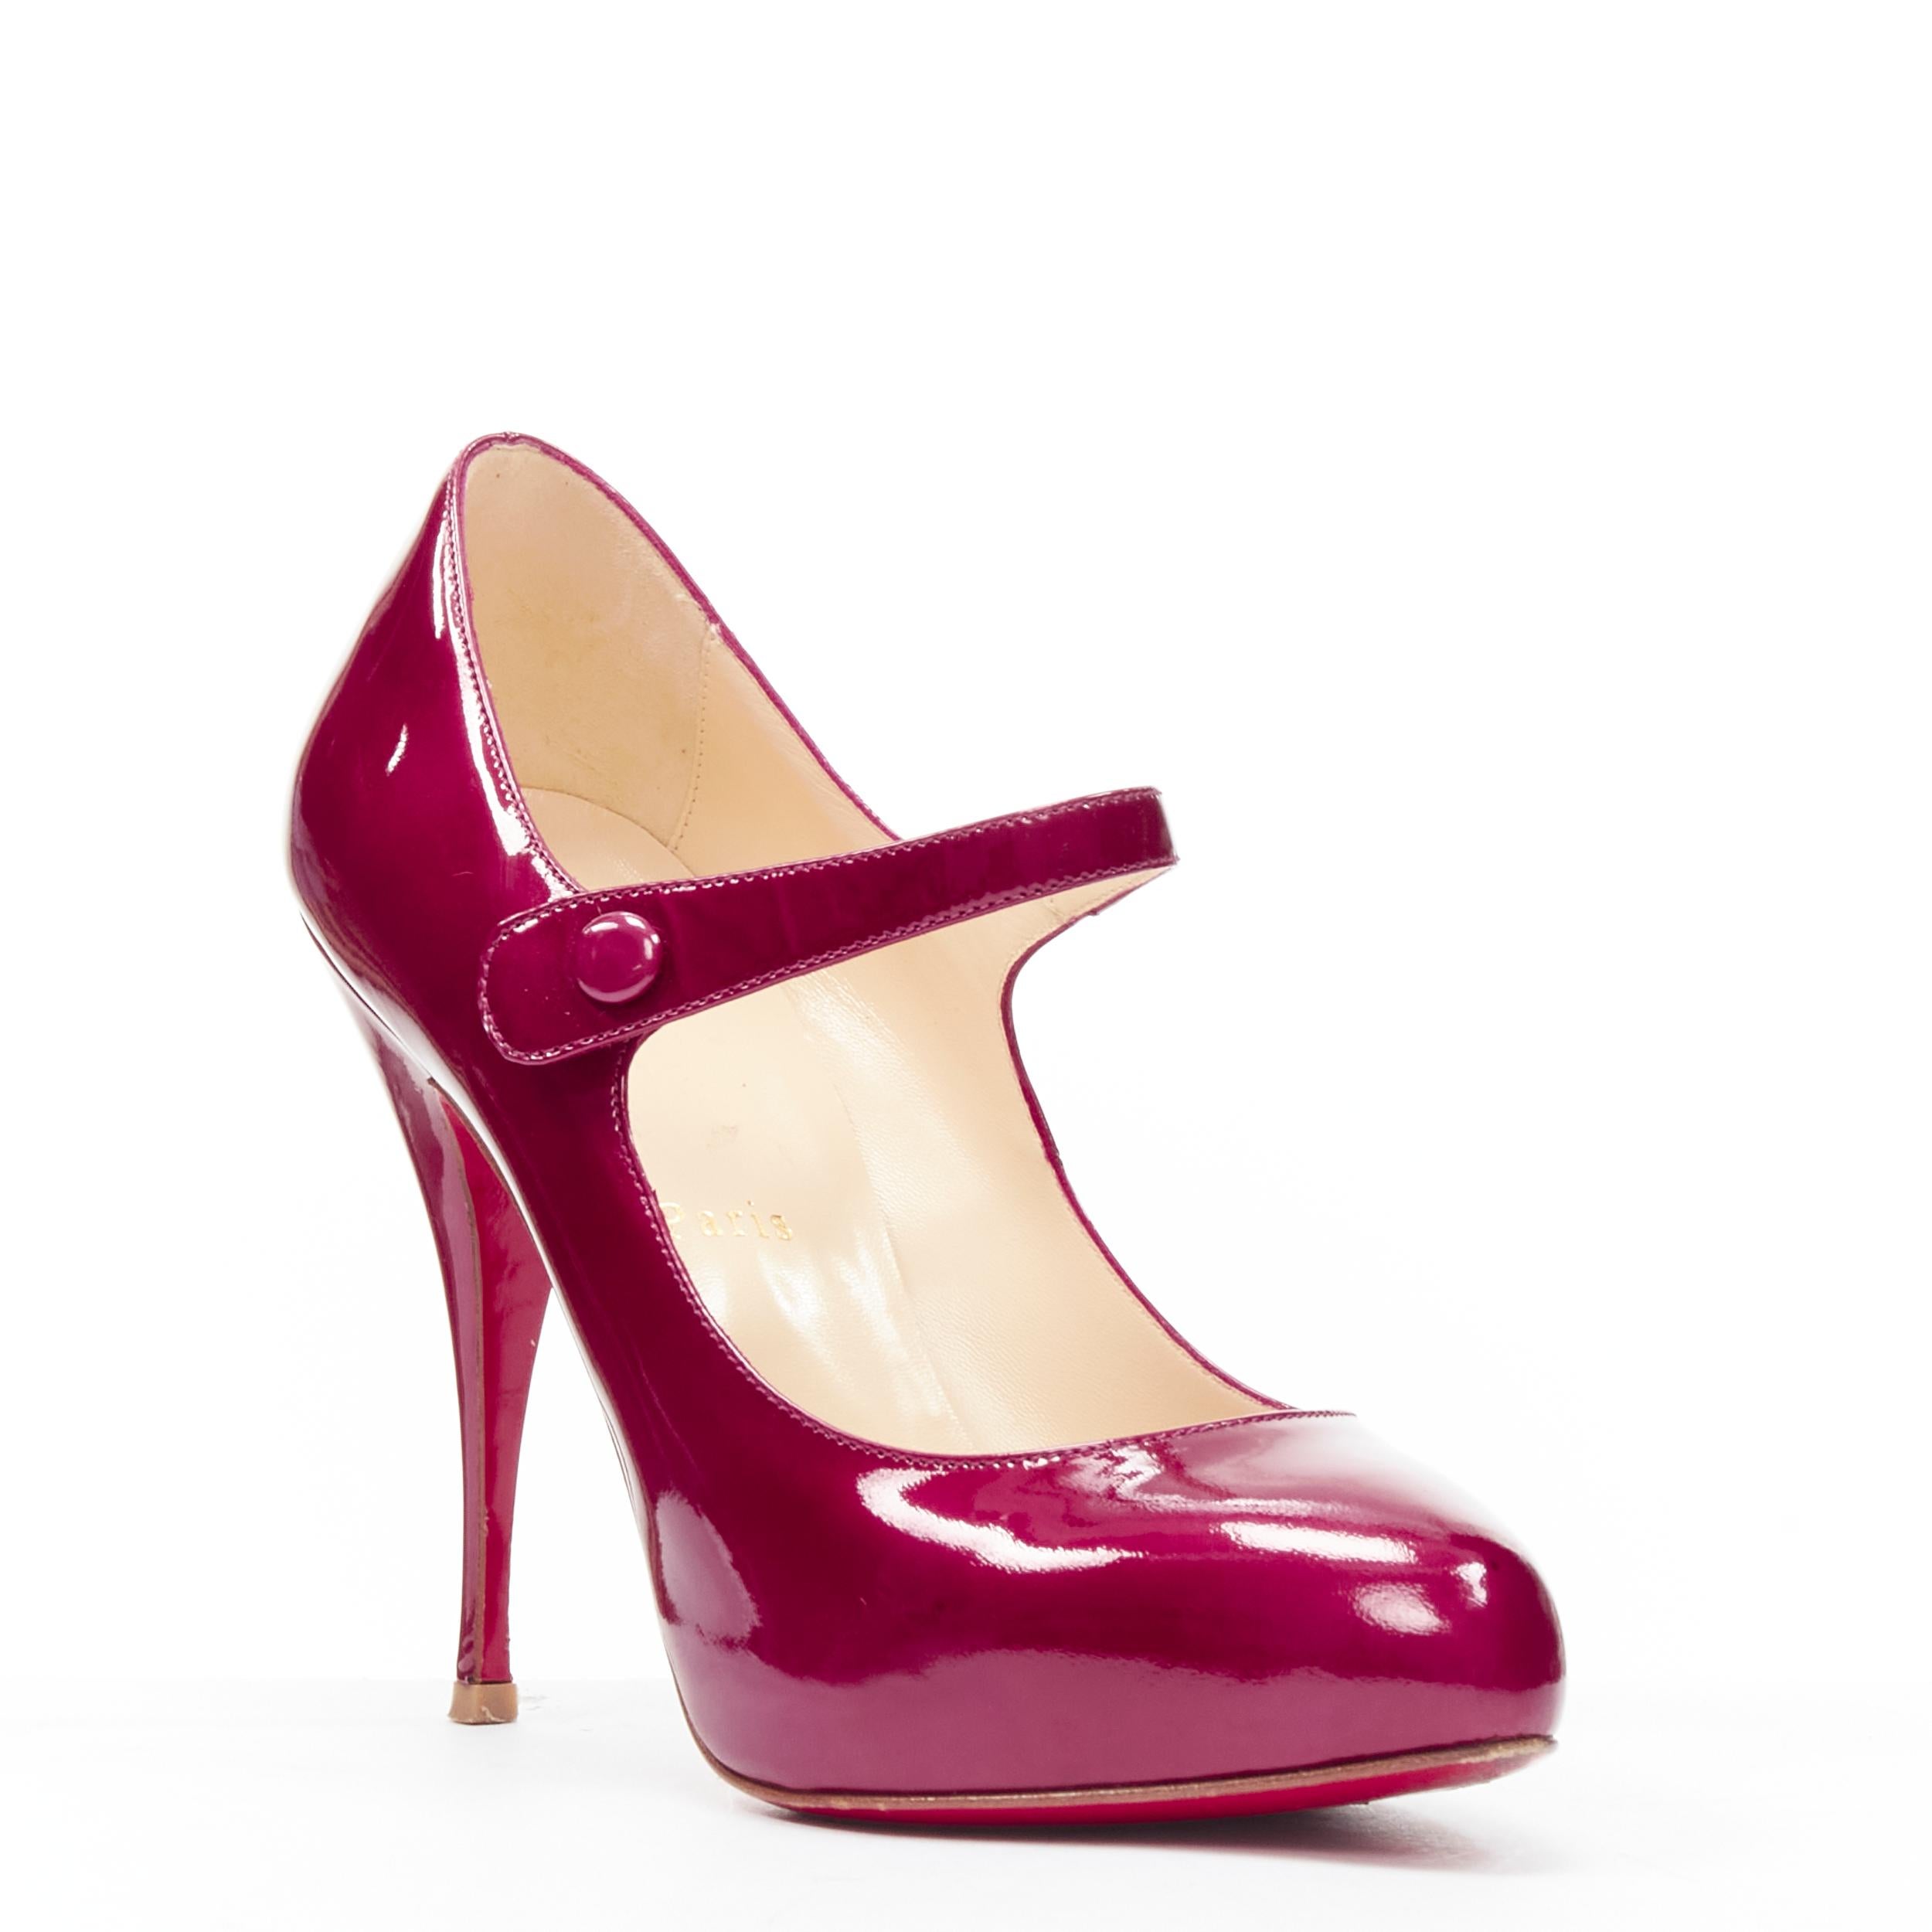 CHRISTIAN LOUBOUTIN Decocolico 120 metal pink patent mary jane heel EU38
Reference: MELK/A00197
Brand: Christian Louboutin
Model: Decocolico 120
Material: Patent Leather
Color: Pink
Pattern: Solid
Closure: Button
Extra Detail: Concealed